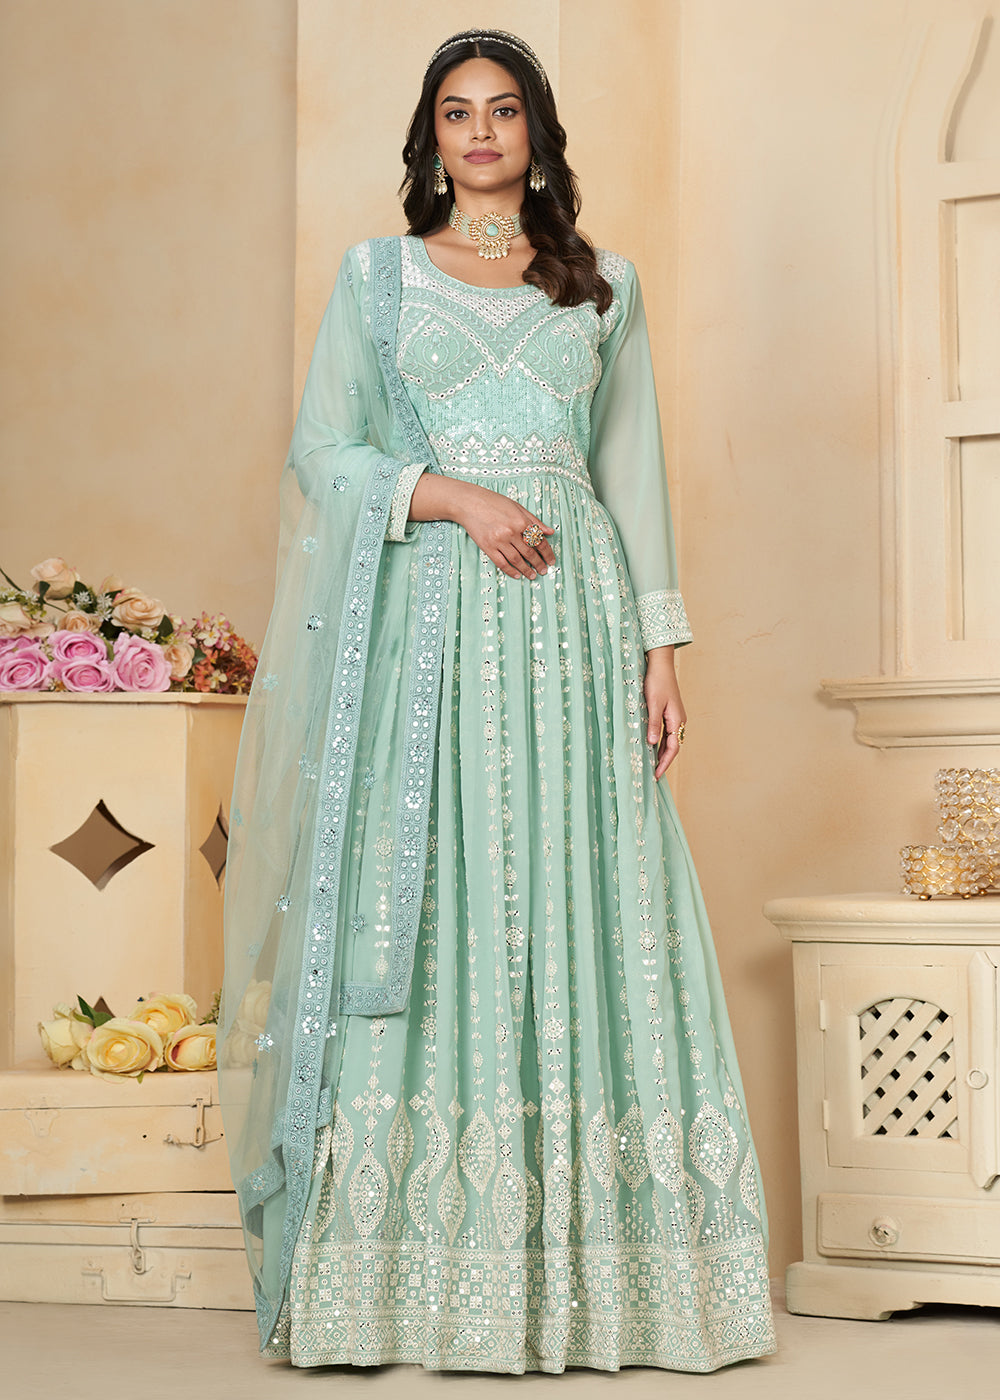 Buy Now Aqua Blue Georgette Embroidered Wedding Anarkali Suit Online in USA, UK, Australia, New Zealand, Canada & Worldwide at Empress Clothing. 